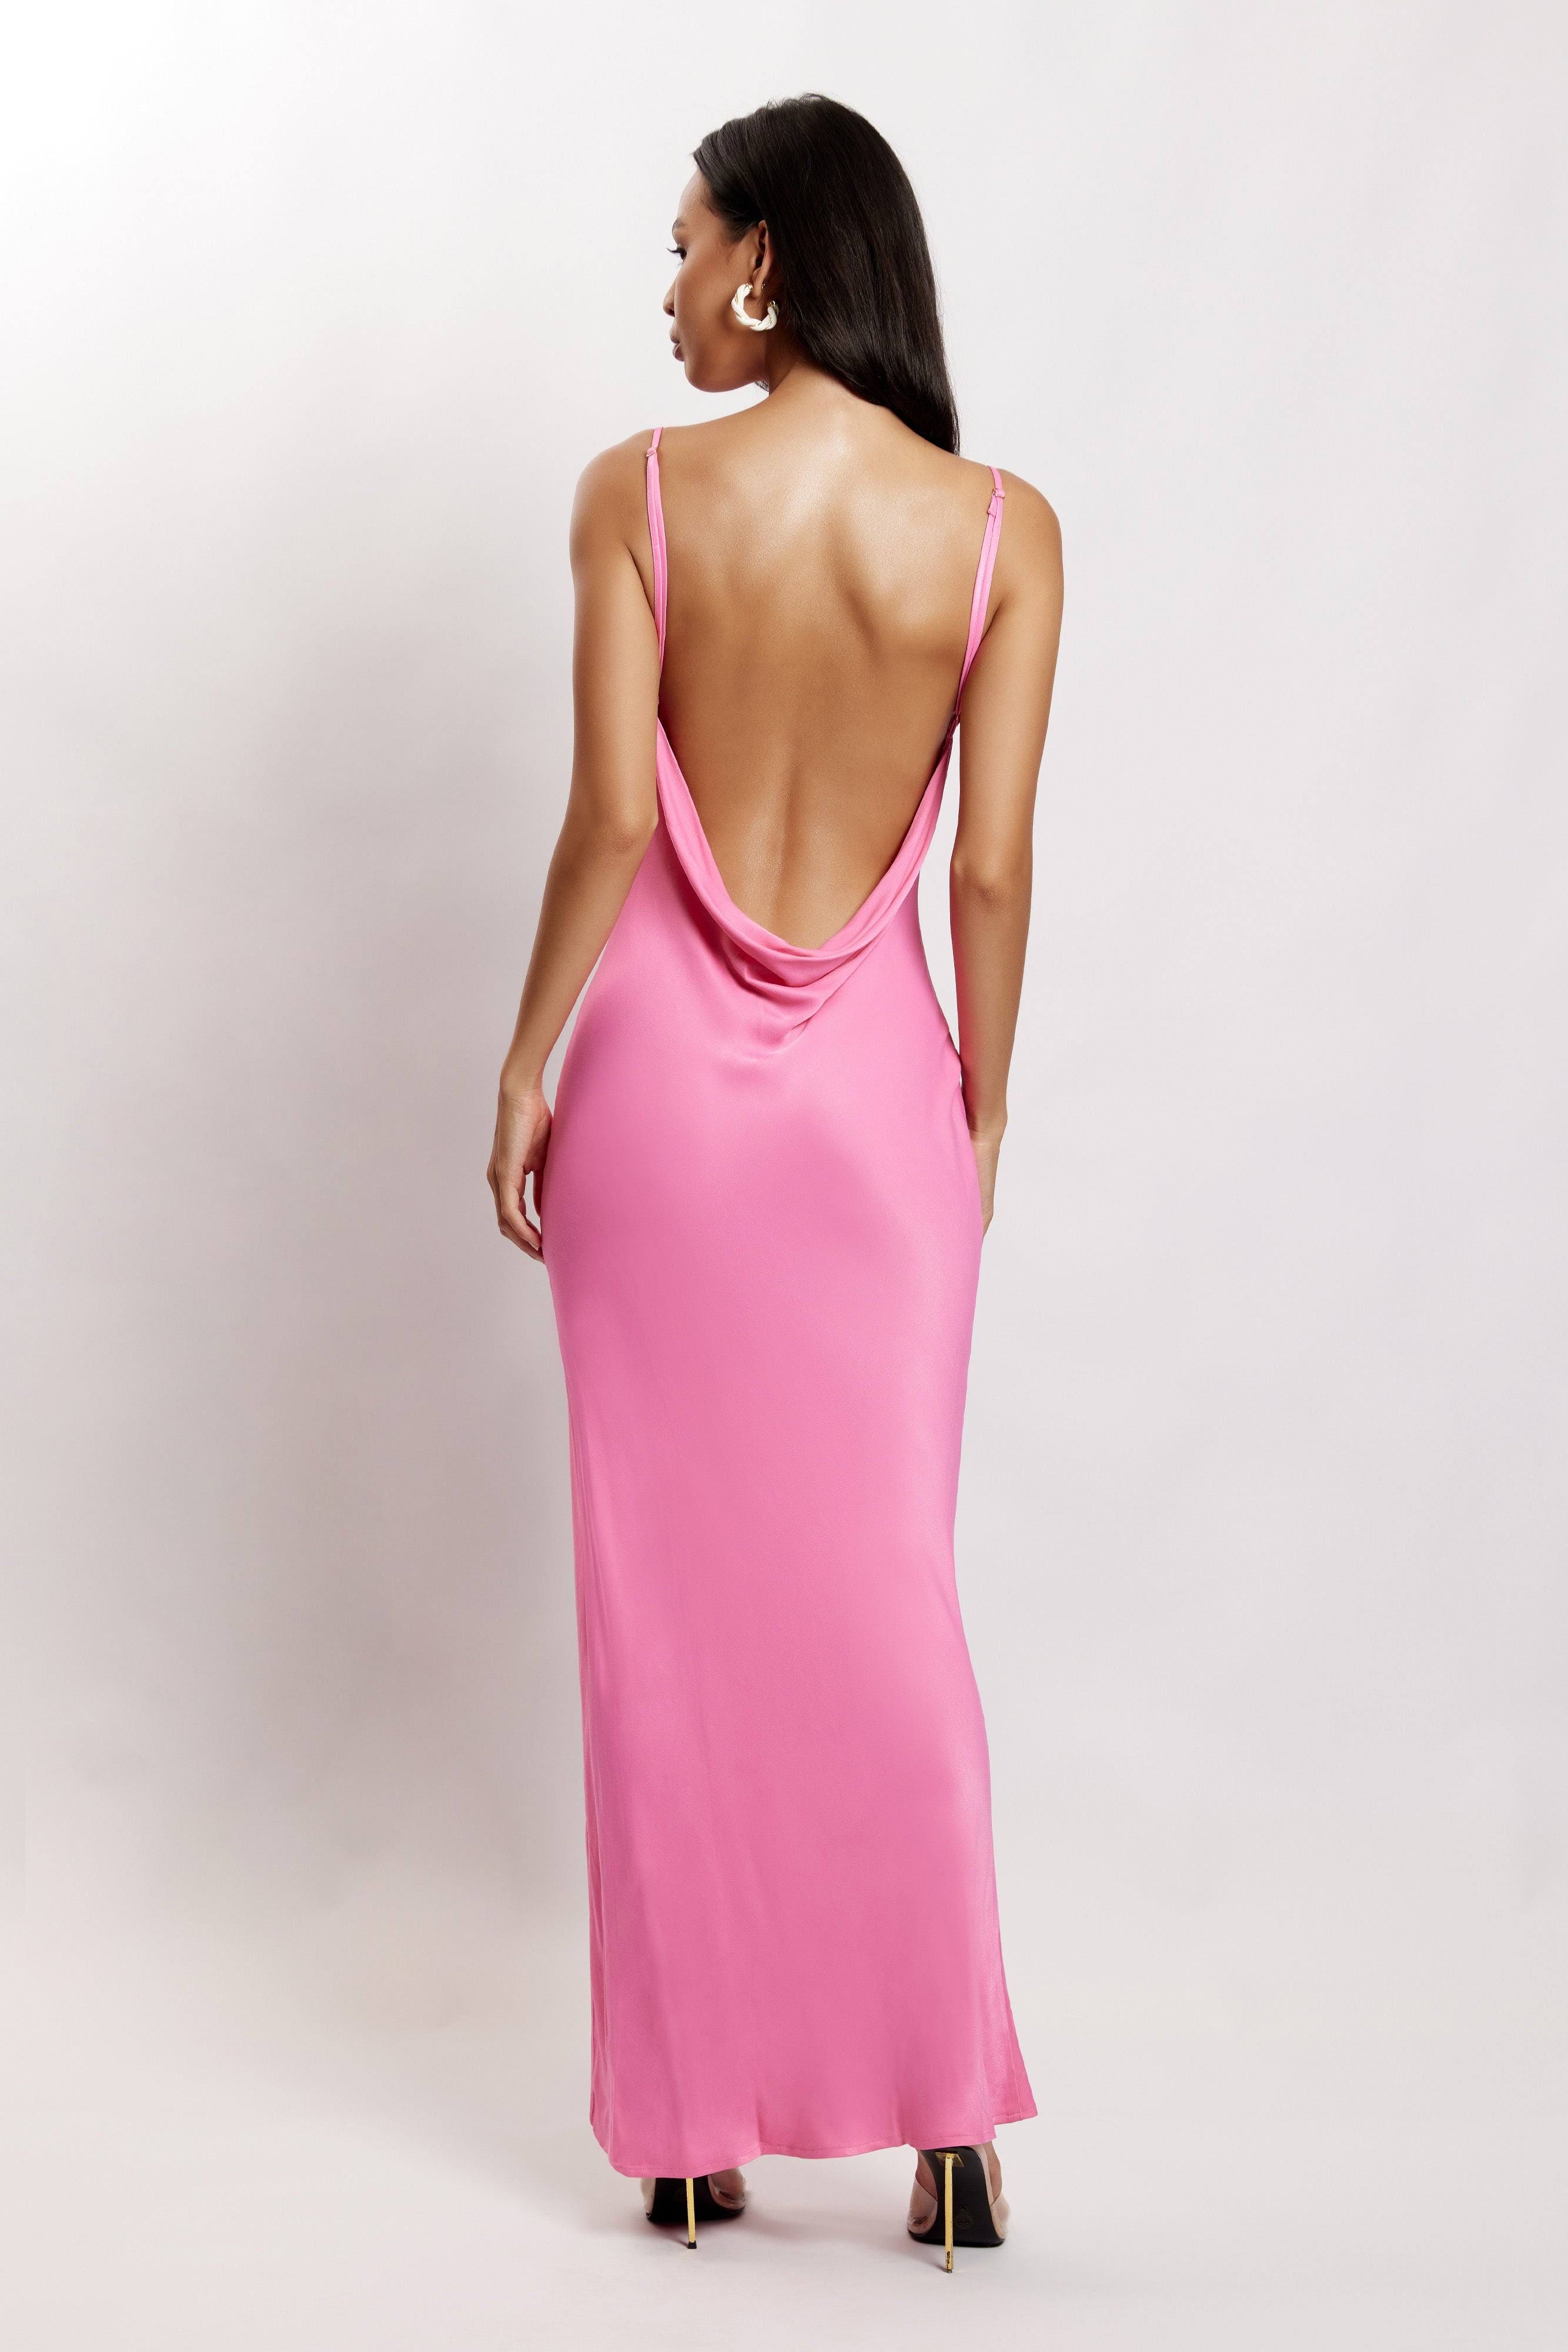 Elegant Backless Maxi Dress for Special Occasions | Image